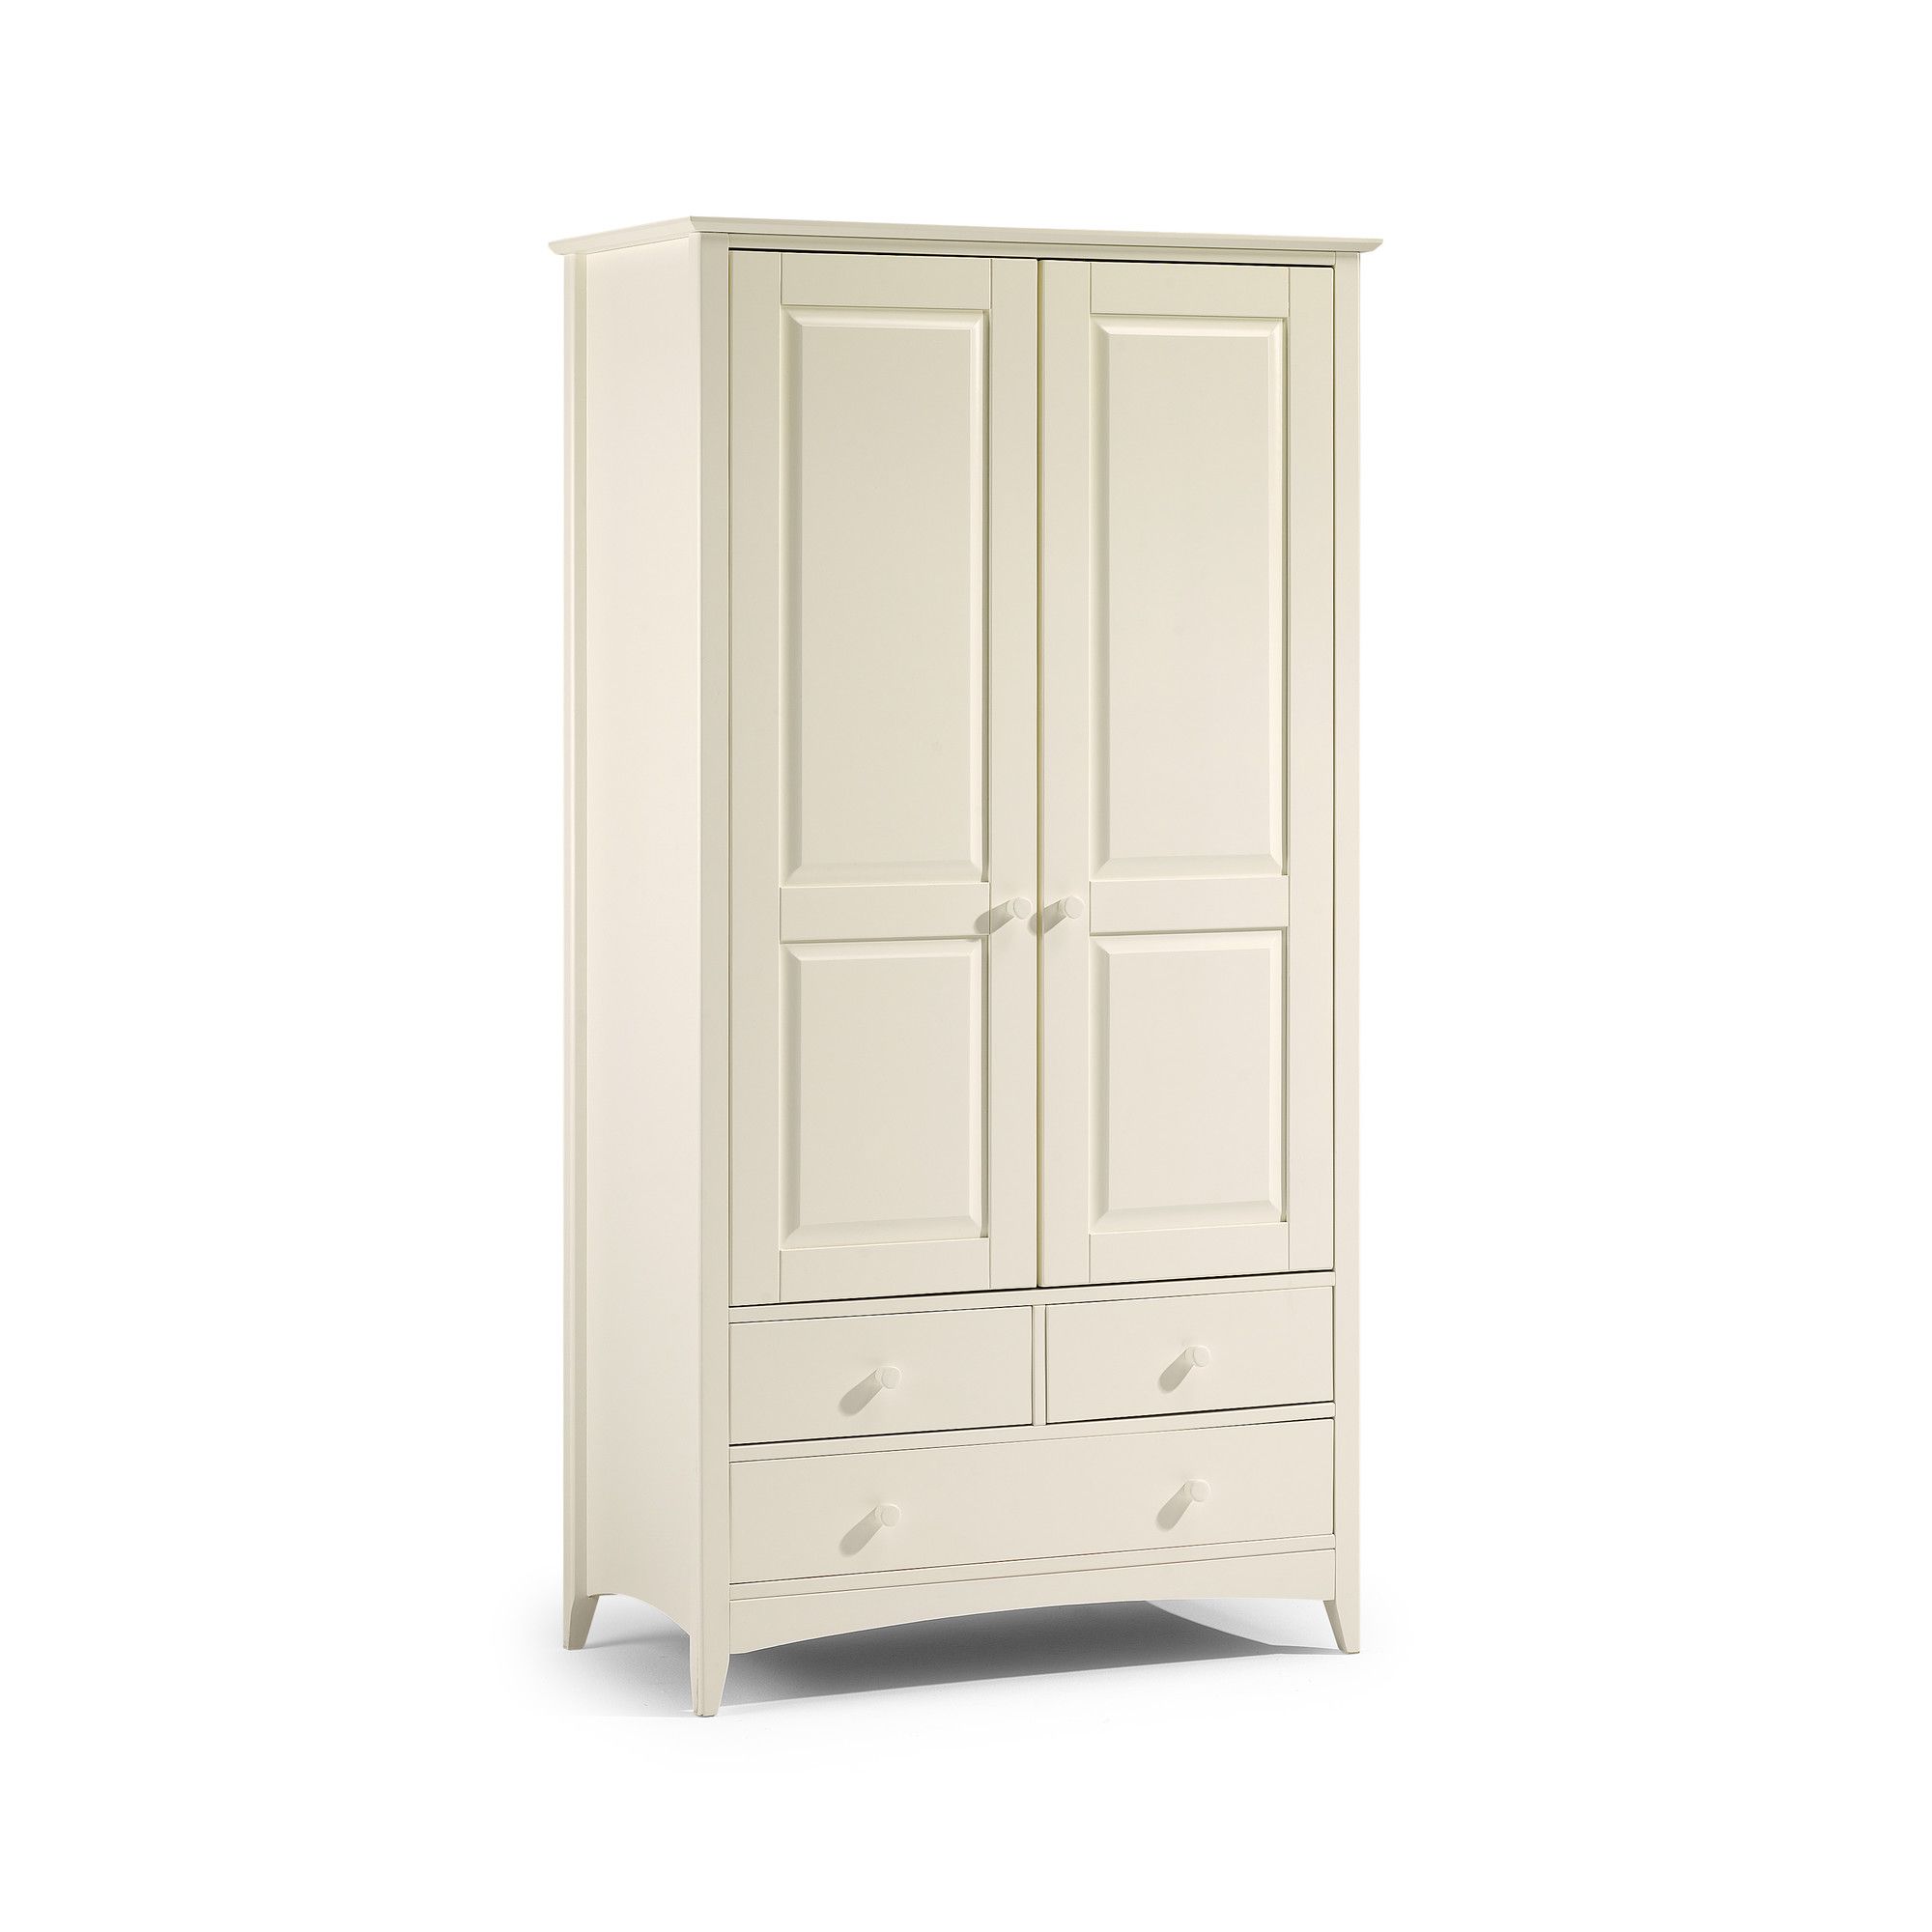 Julian Bowen Cameo Combination Wardrobe in Off White Lacquer at Tescos Direct